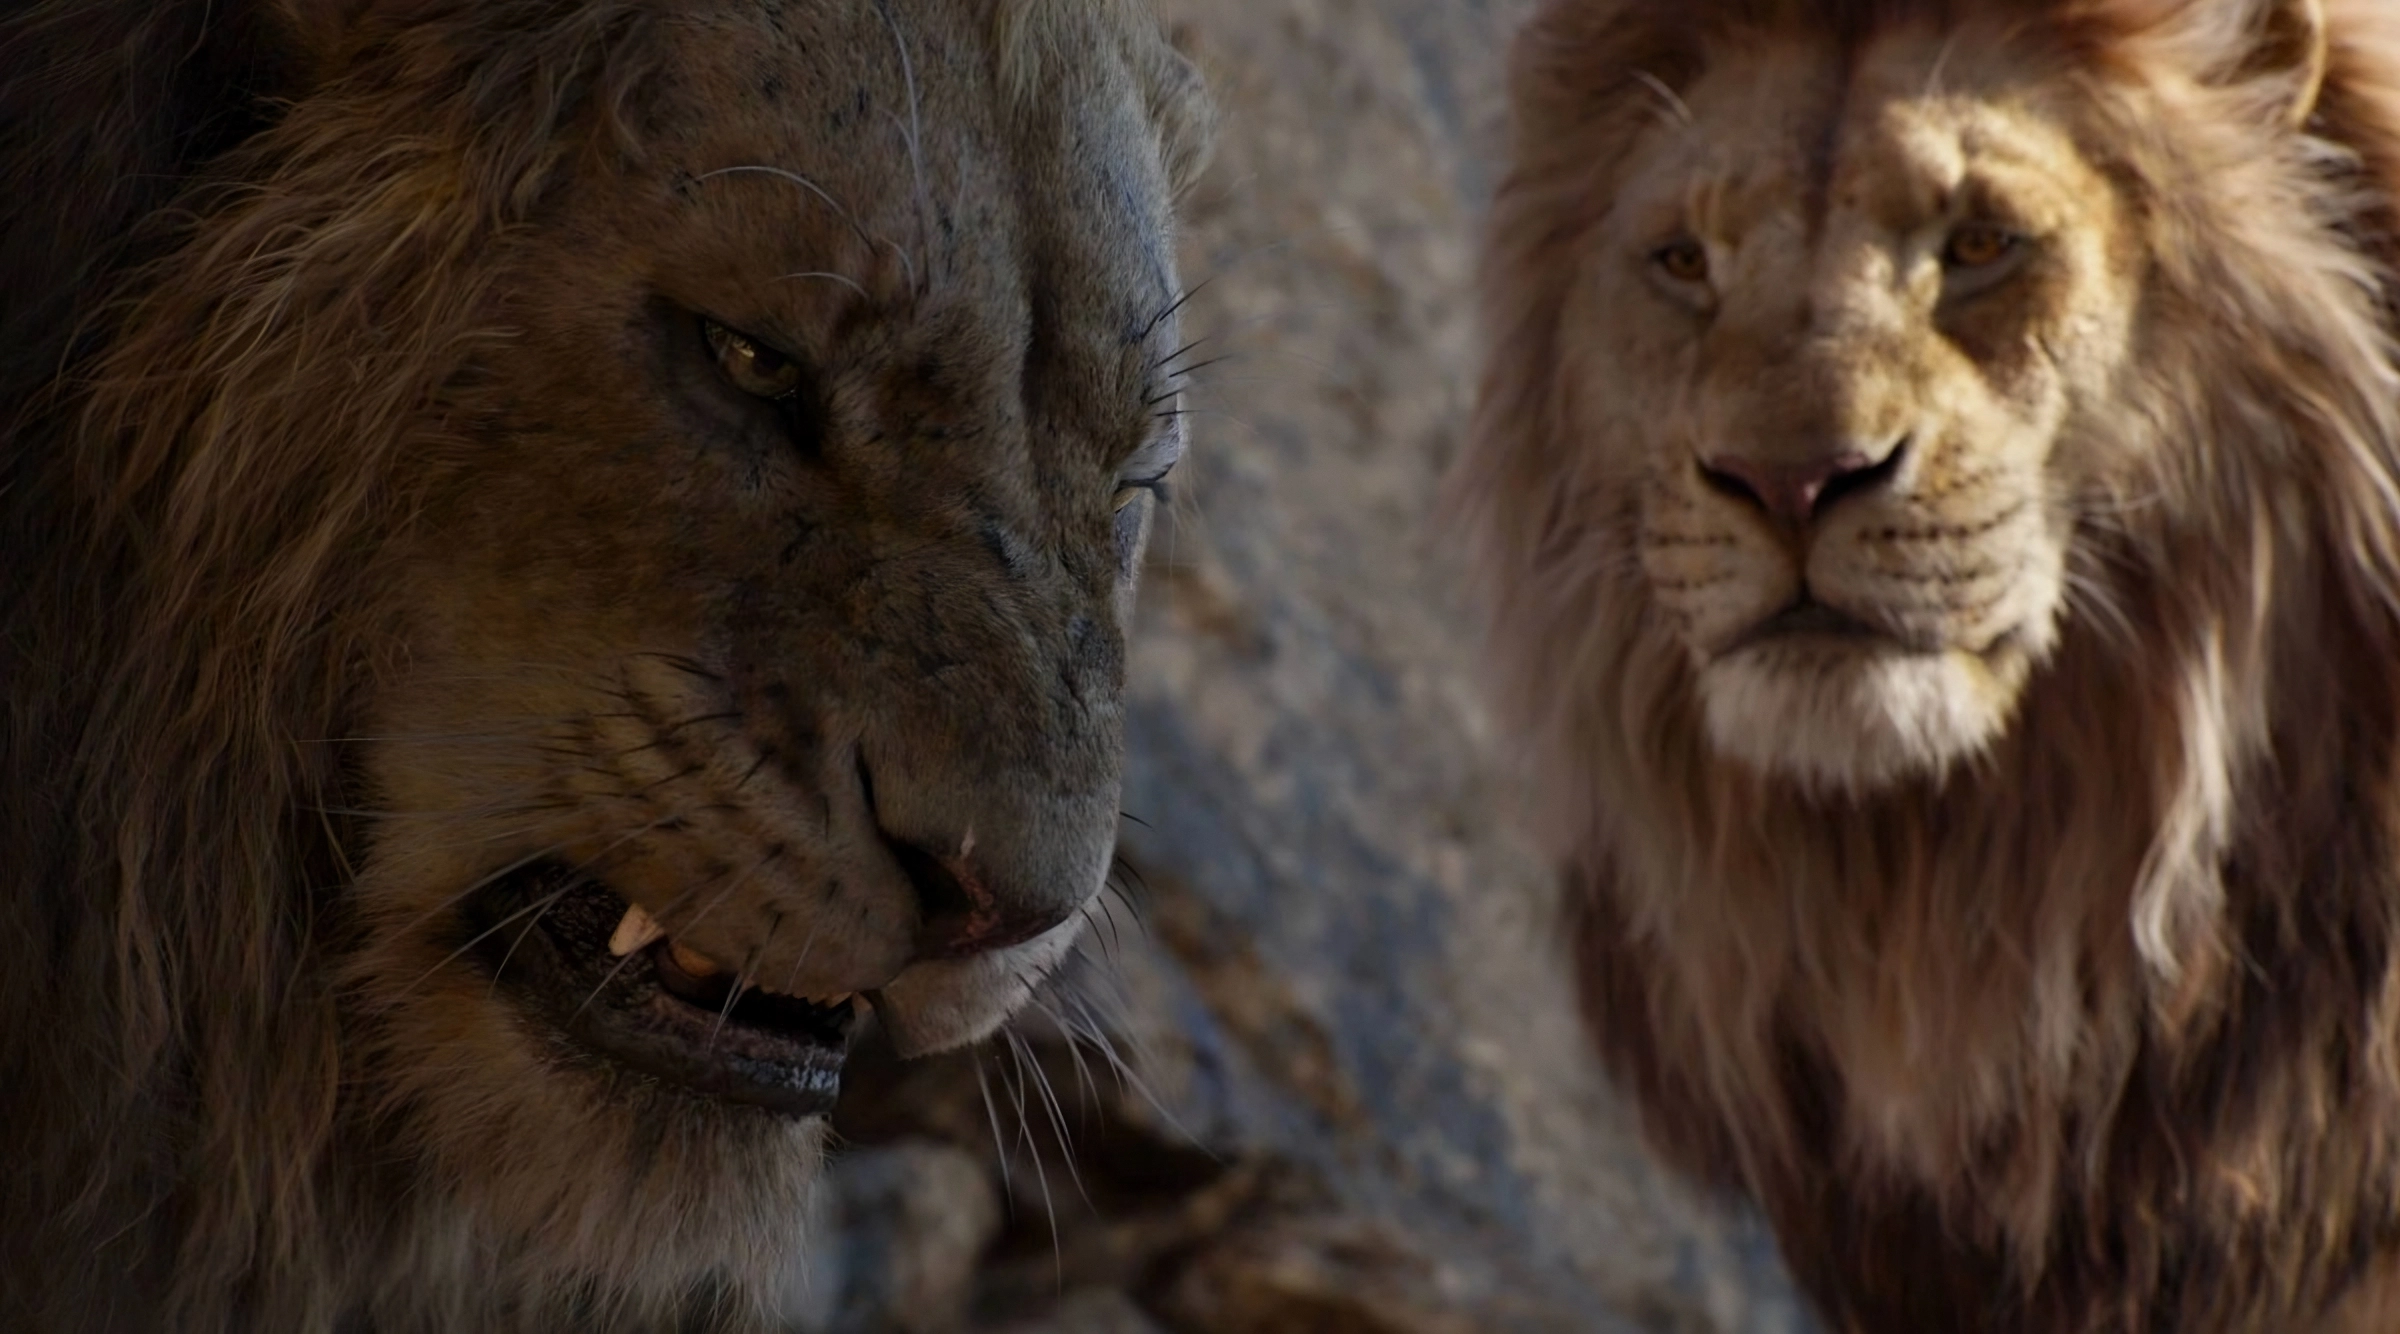 mufasa and scar transformed